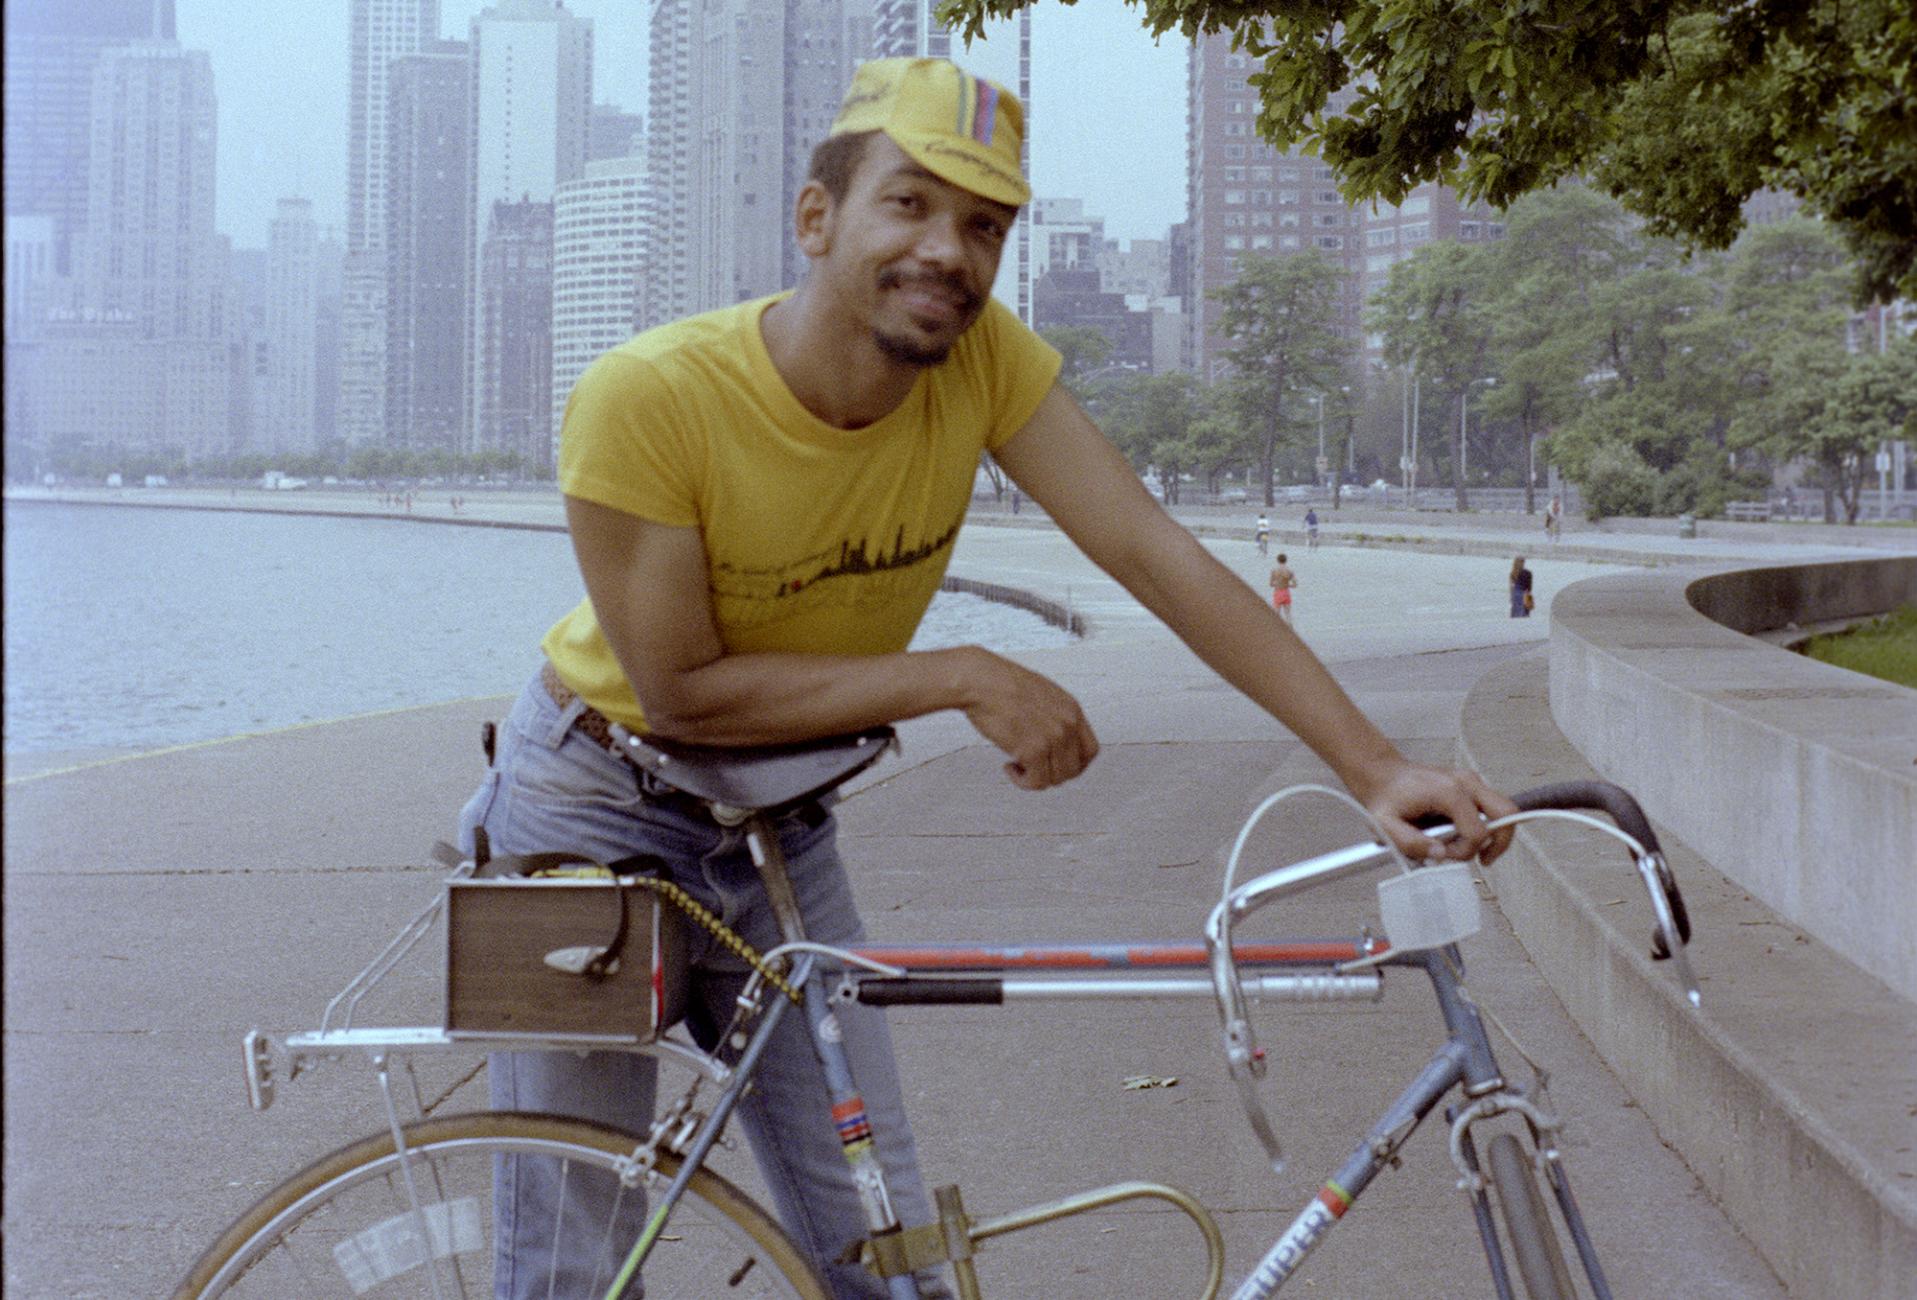 Patrick McCoy on the Chicago lakefront bike path in the 1980s